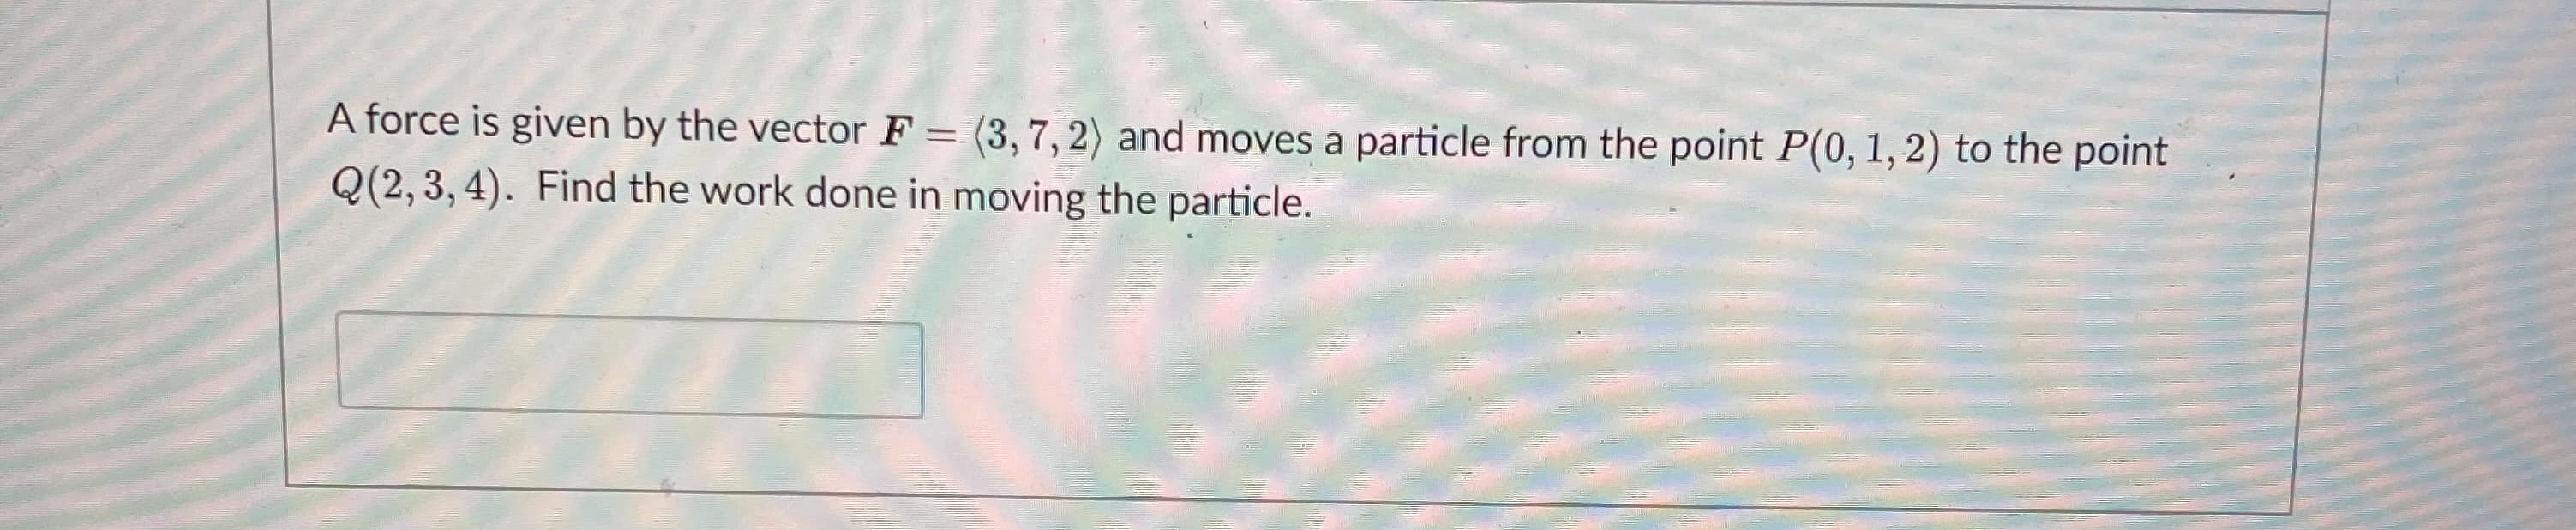 A force is given by the vector F = (3,7, 2) and moves a particle from the point P(0, 1, 2) to the point
Q(2, 3, 4). Find the work done in moving the particle.
